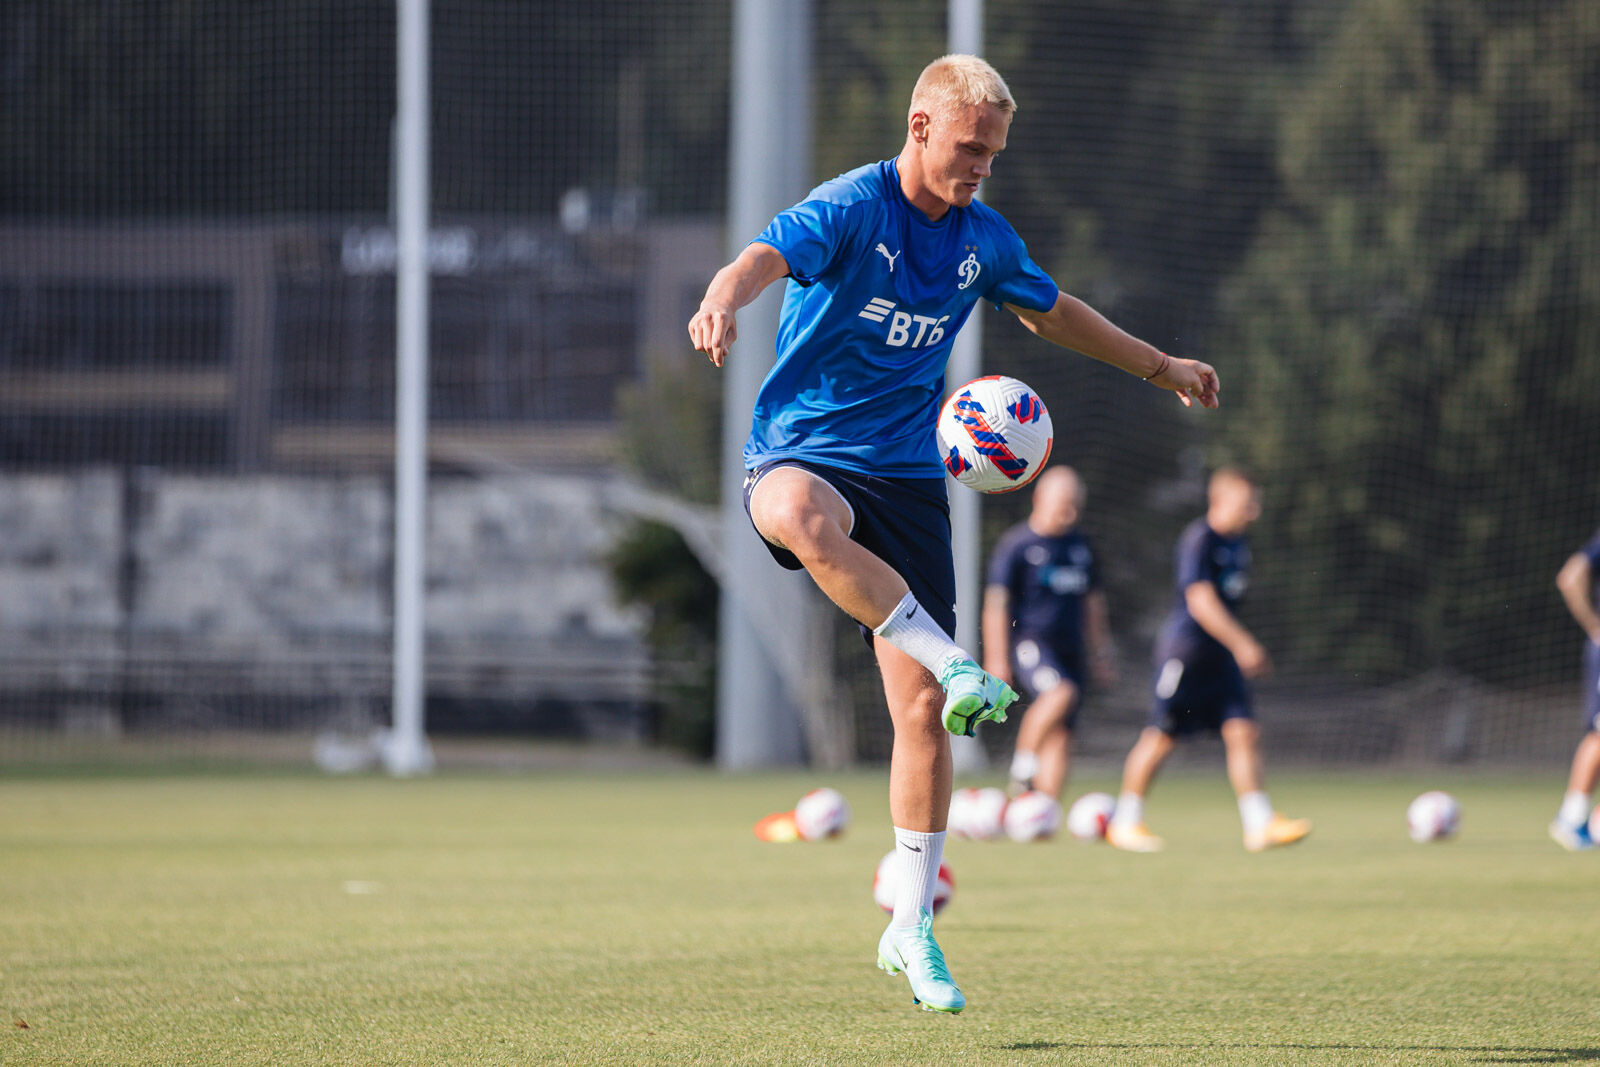 Training session before the match against Ufa